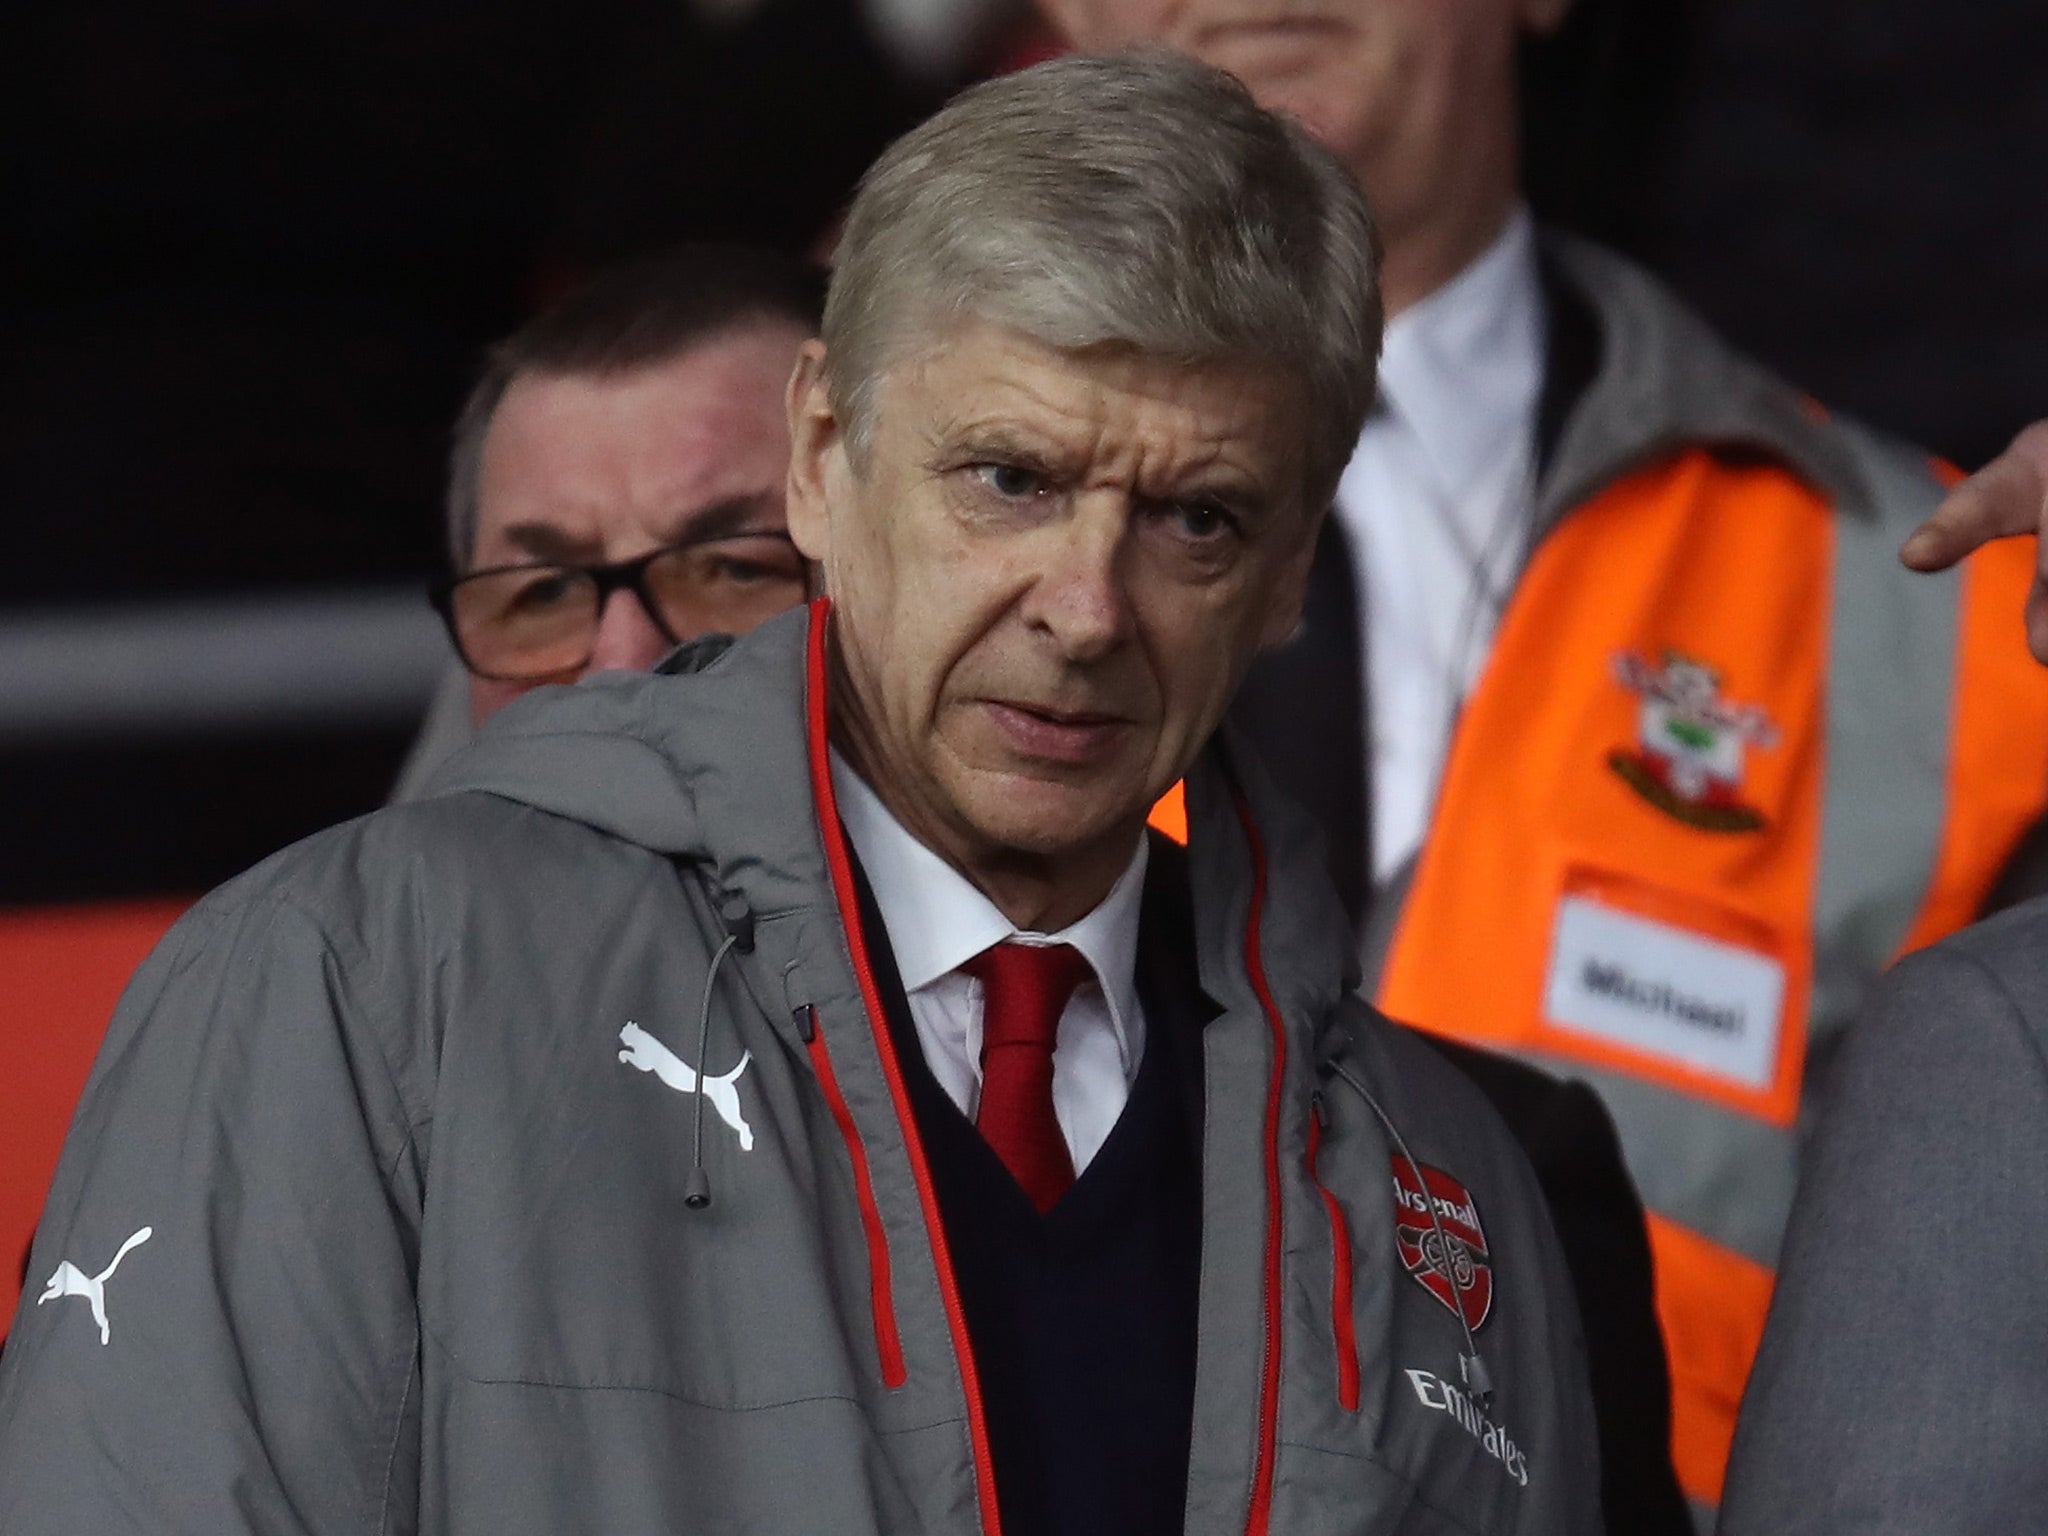 Wenger has refused to rule Arsenal out of the title race despite being 12 points behind Chelsea